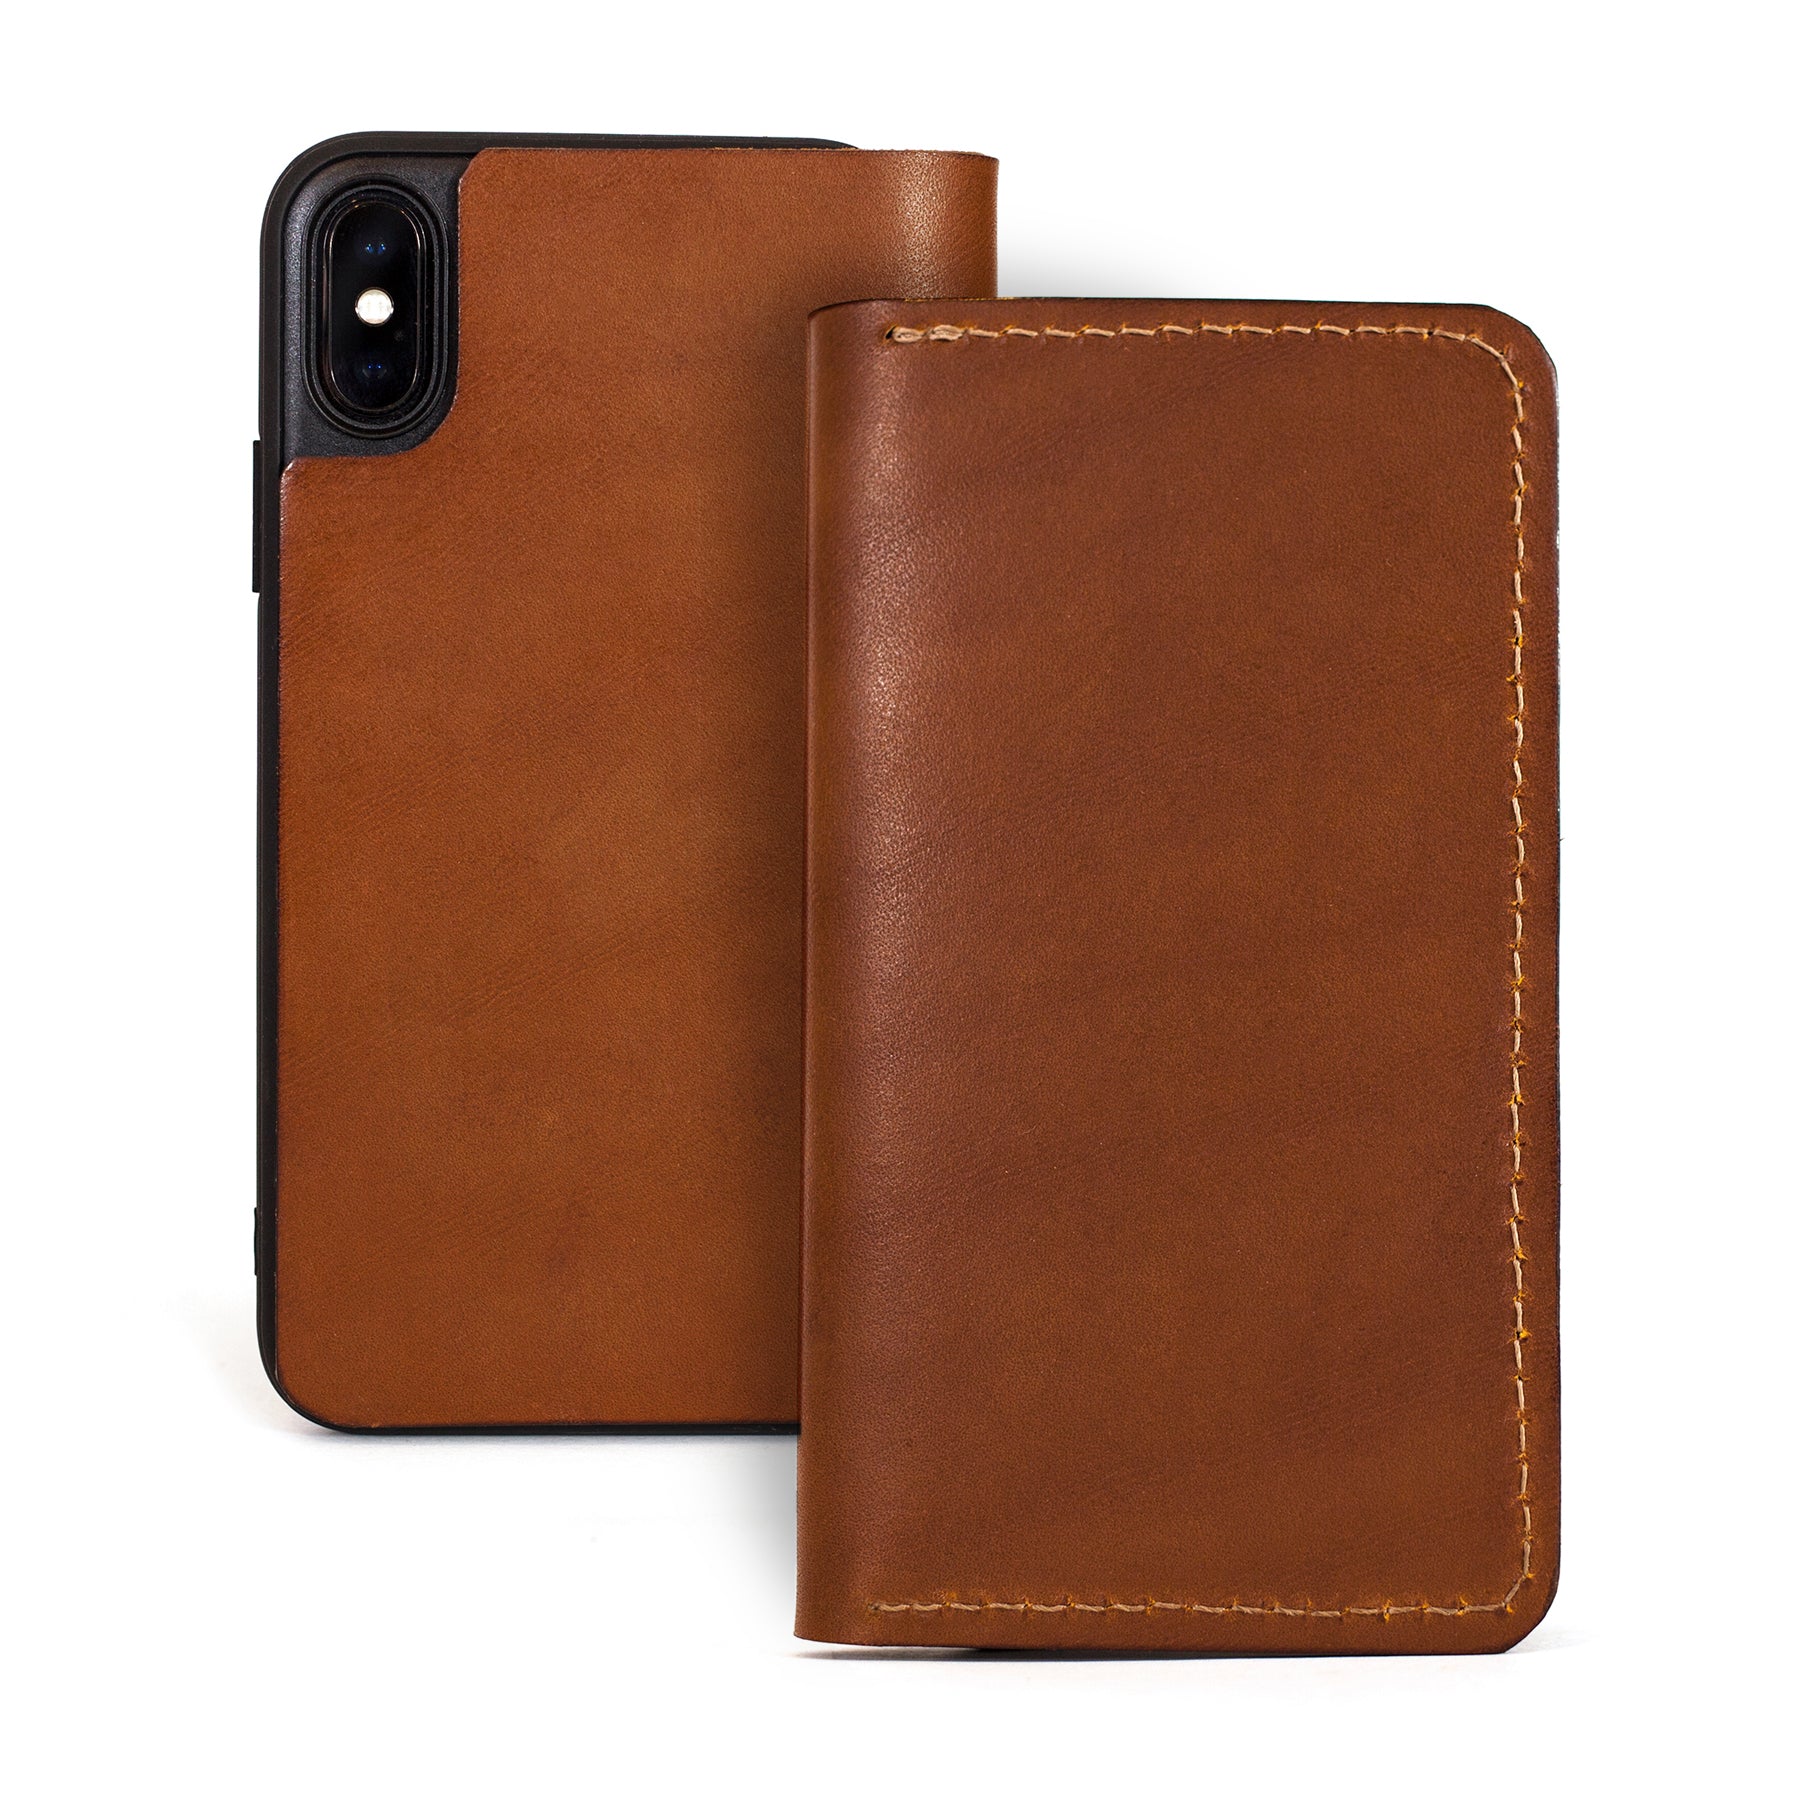 iPhone X leather case, made in the usa, iphone X, iphone wallet, leather iphone X case, new iphone, most recent iphone, iphone update, iphone 10